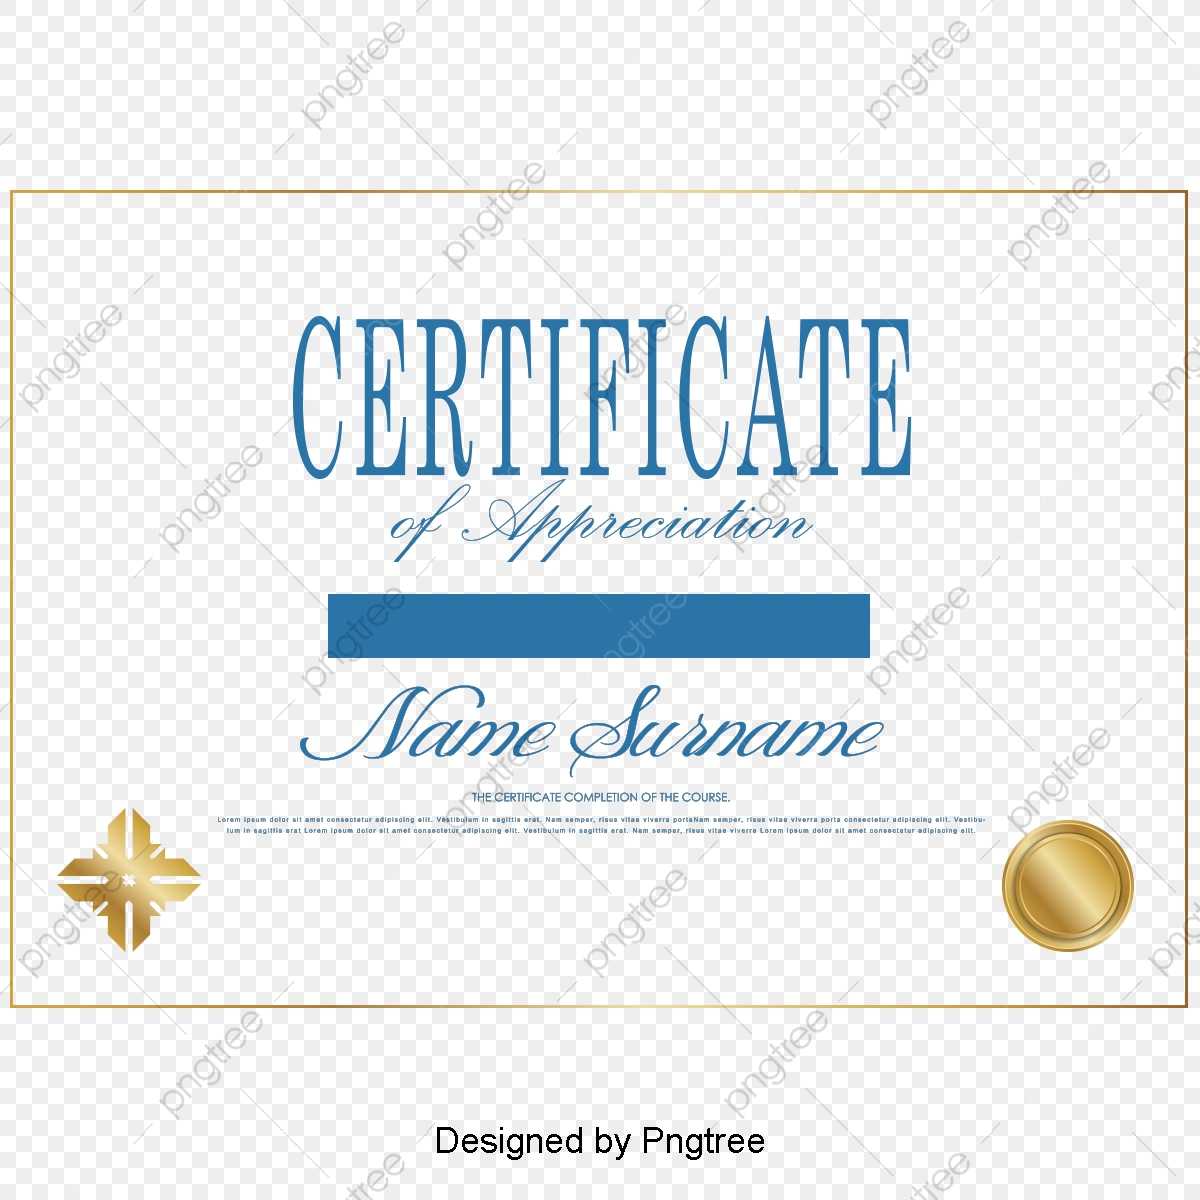 Simple Certificate Certificates Design Vector Material For Update Certificates That Use Certificate Templates